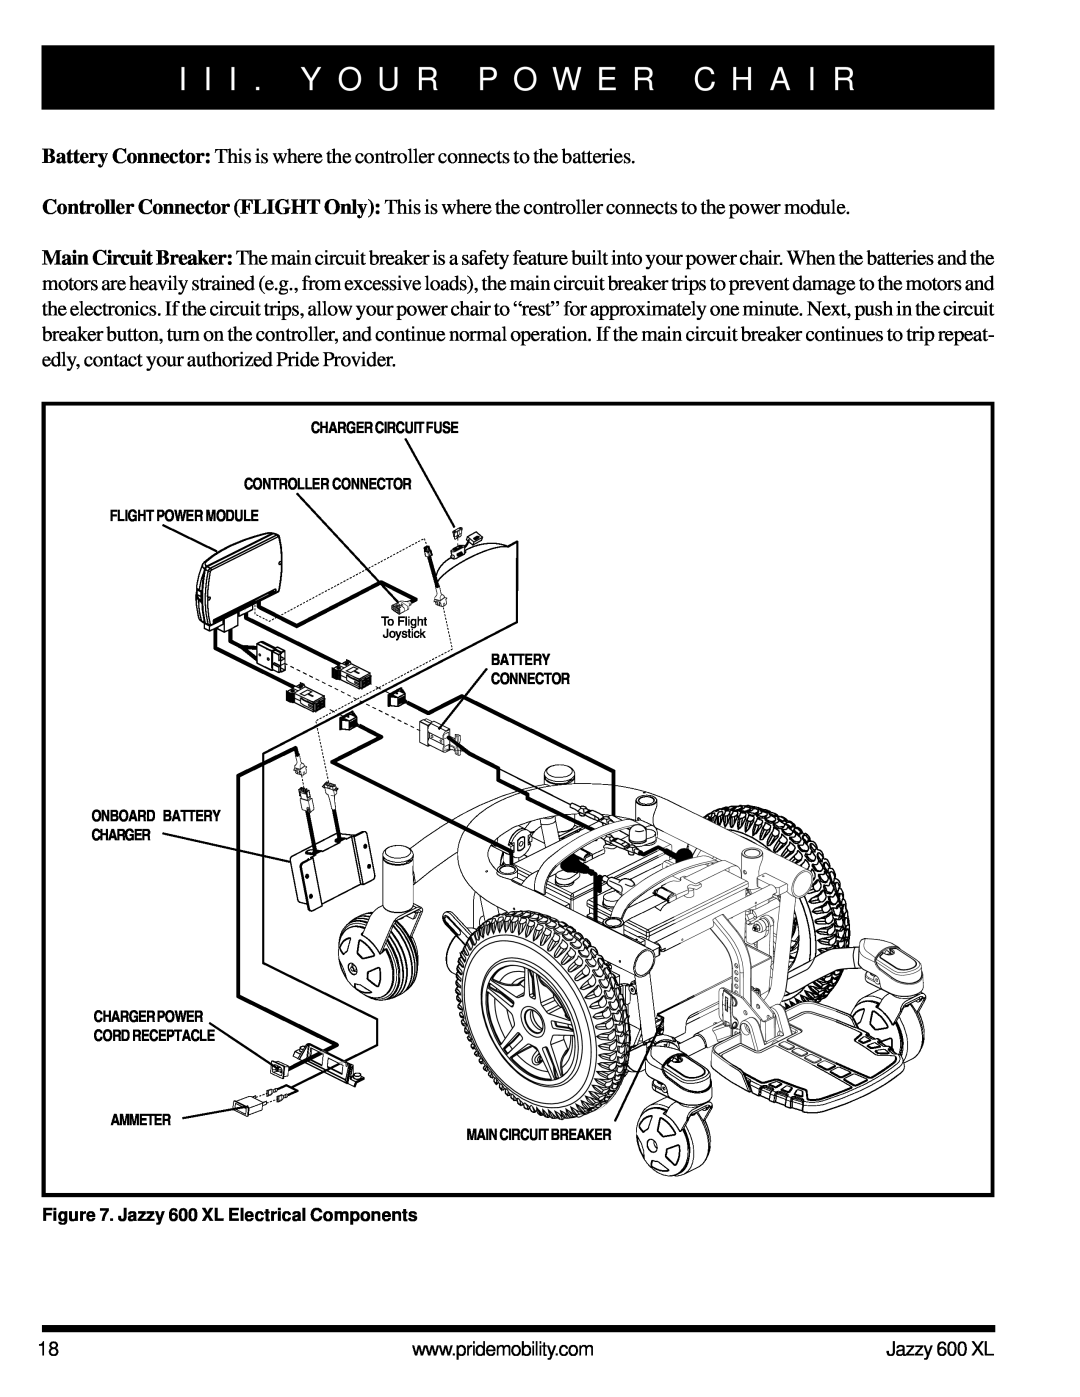 Pride Mobility owner manual I I I . Y O U R P O W E R C H A I R, Jazzy 600 XL Electrical Components 